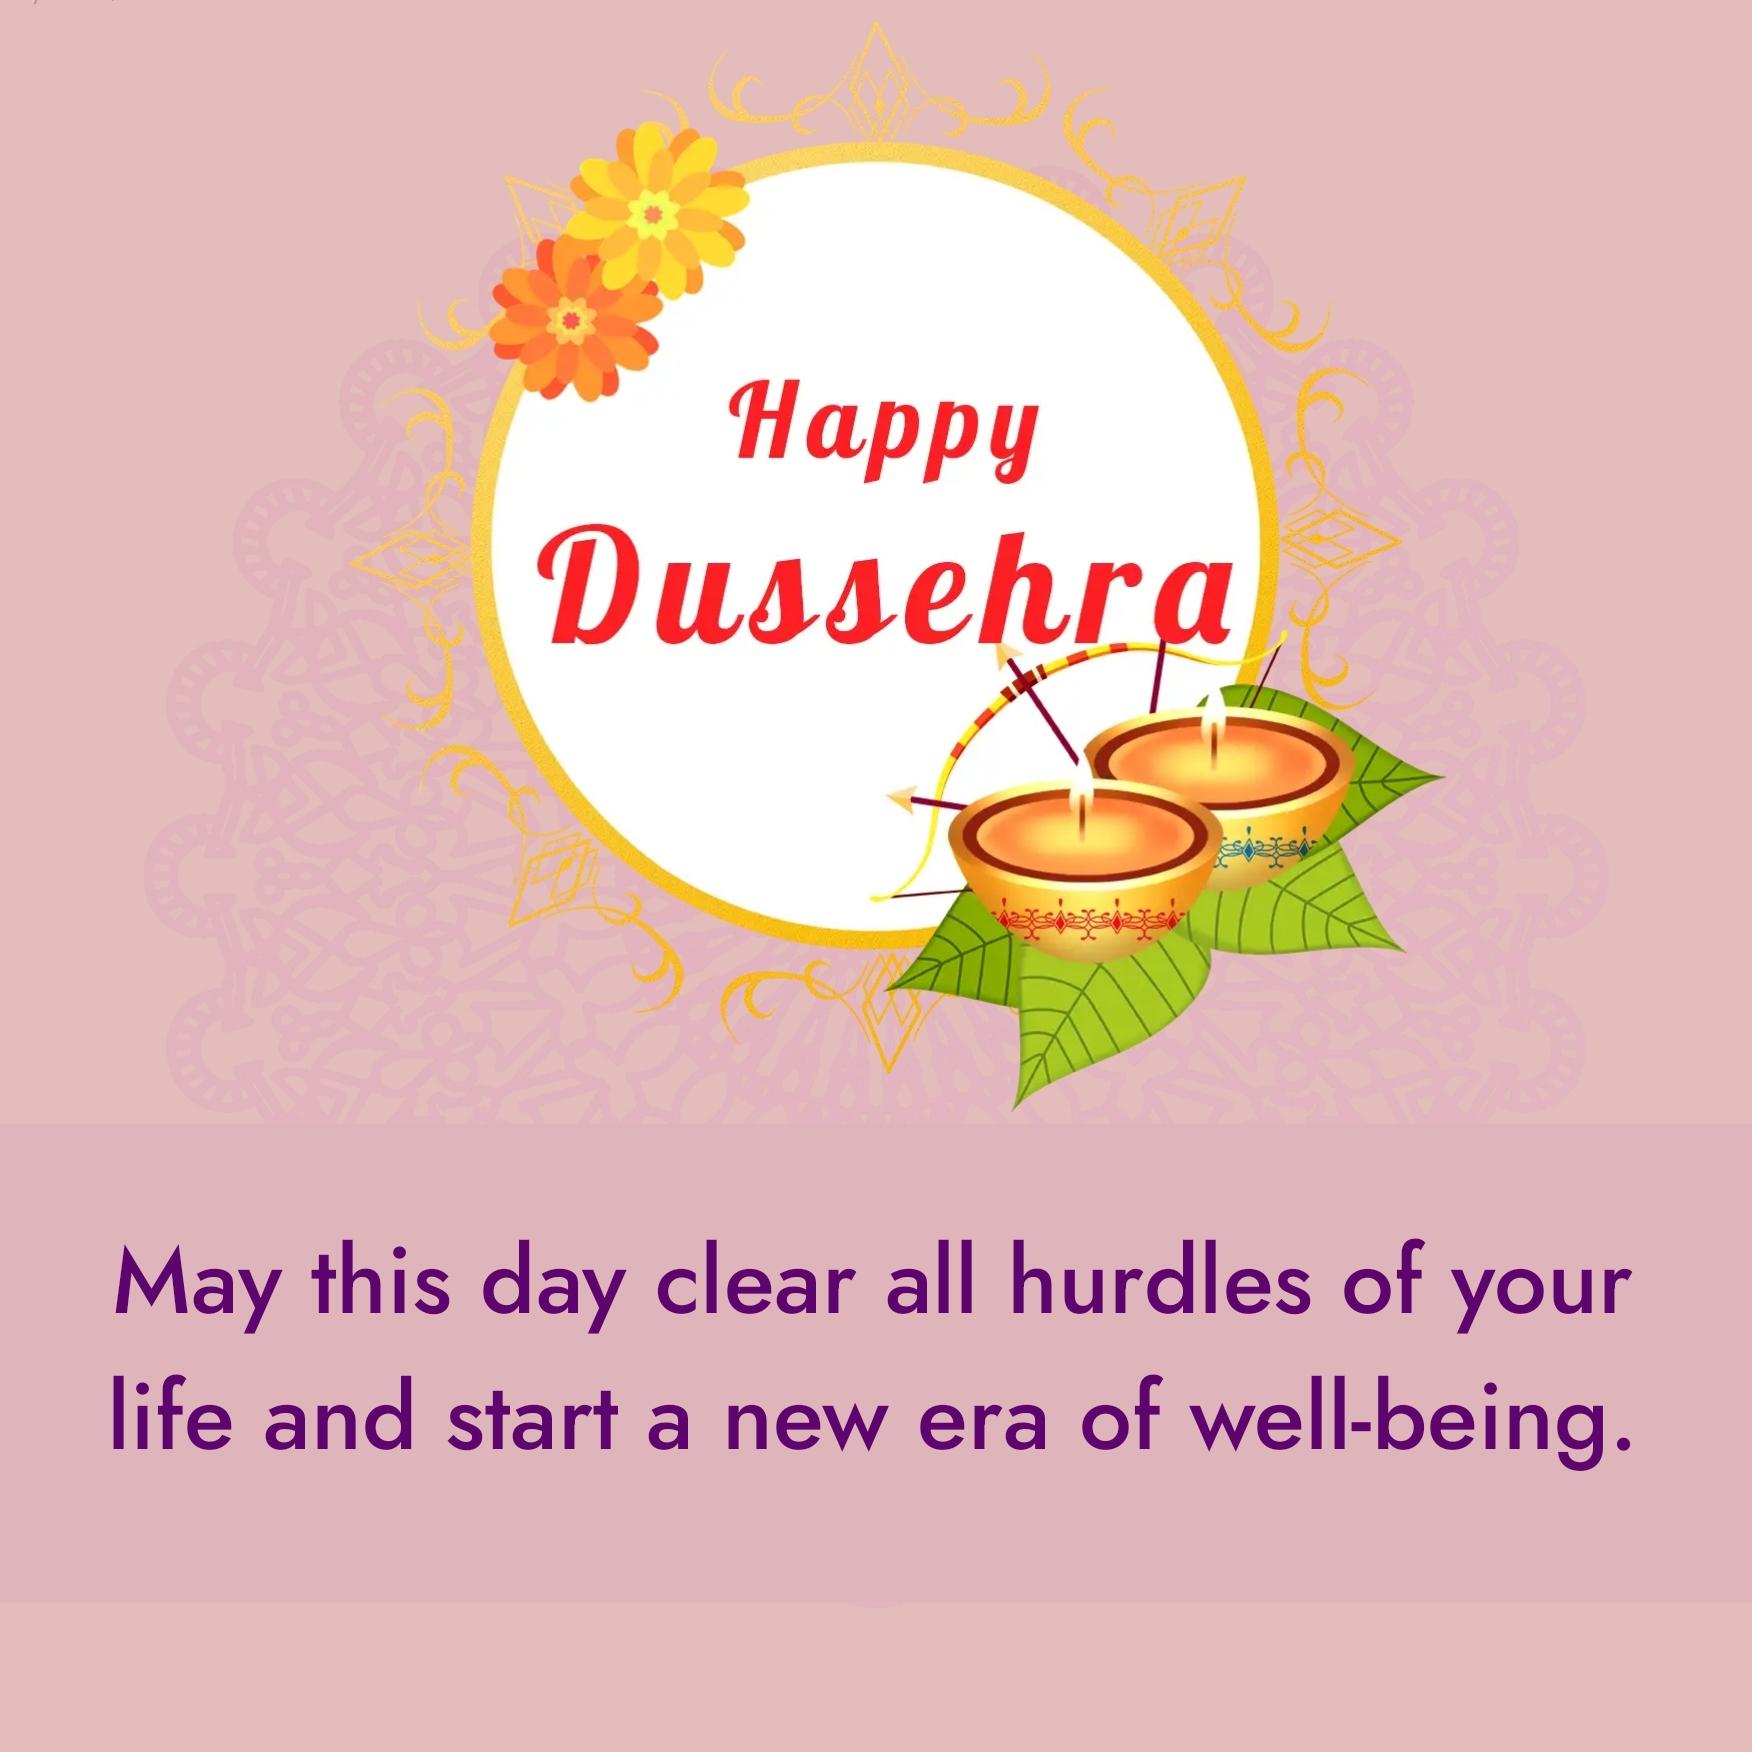 May this day clear all hurdles of your life and start a new era